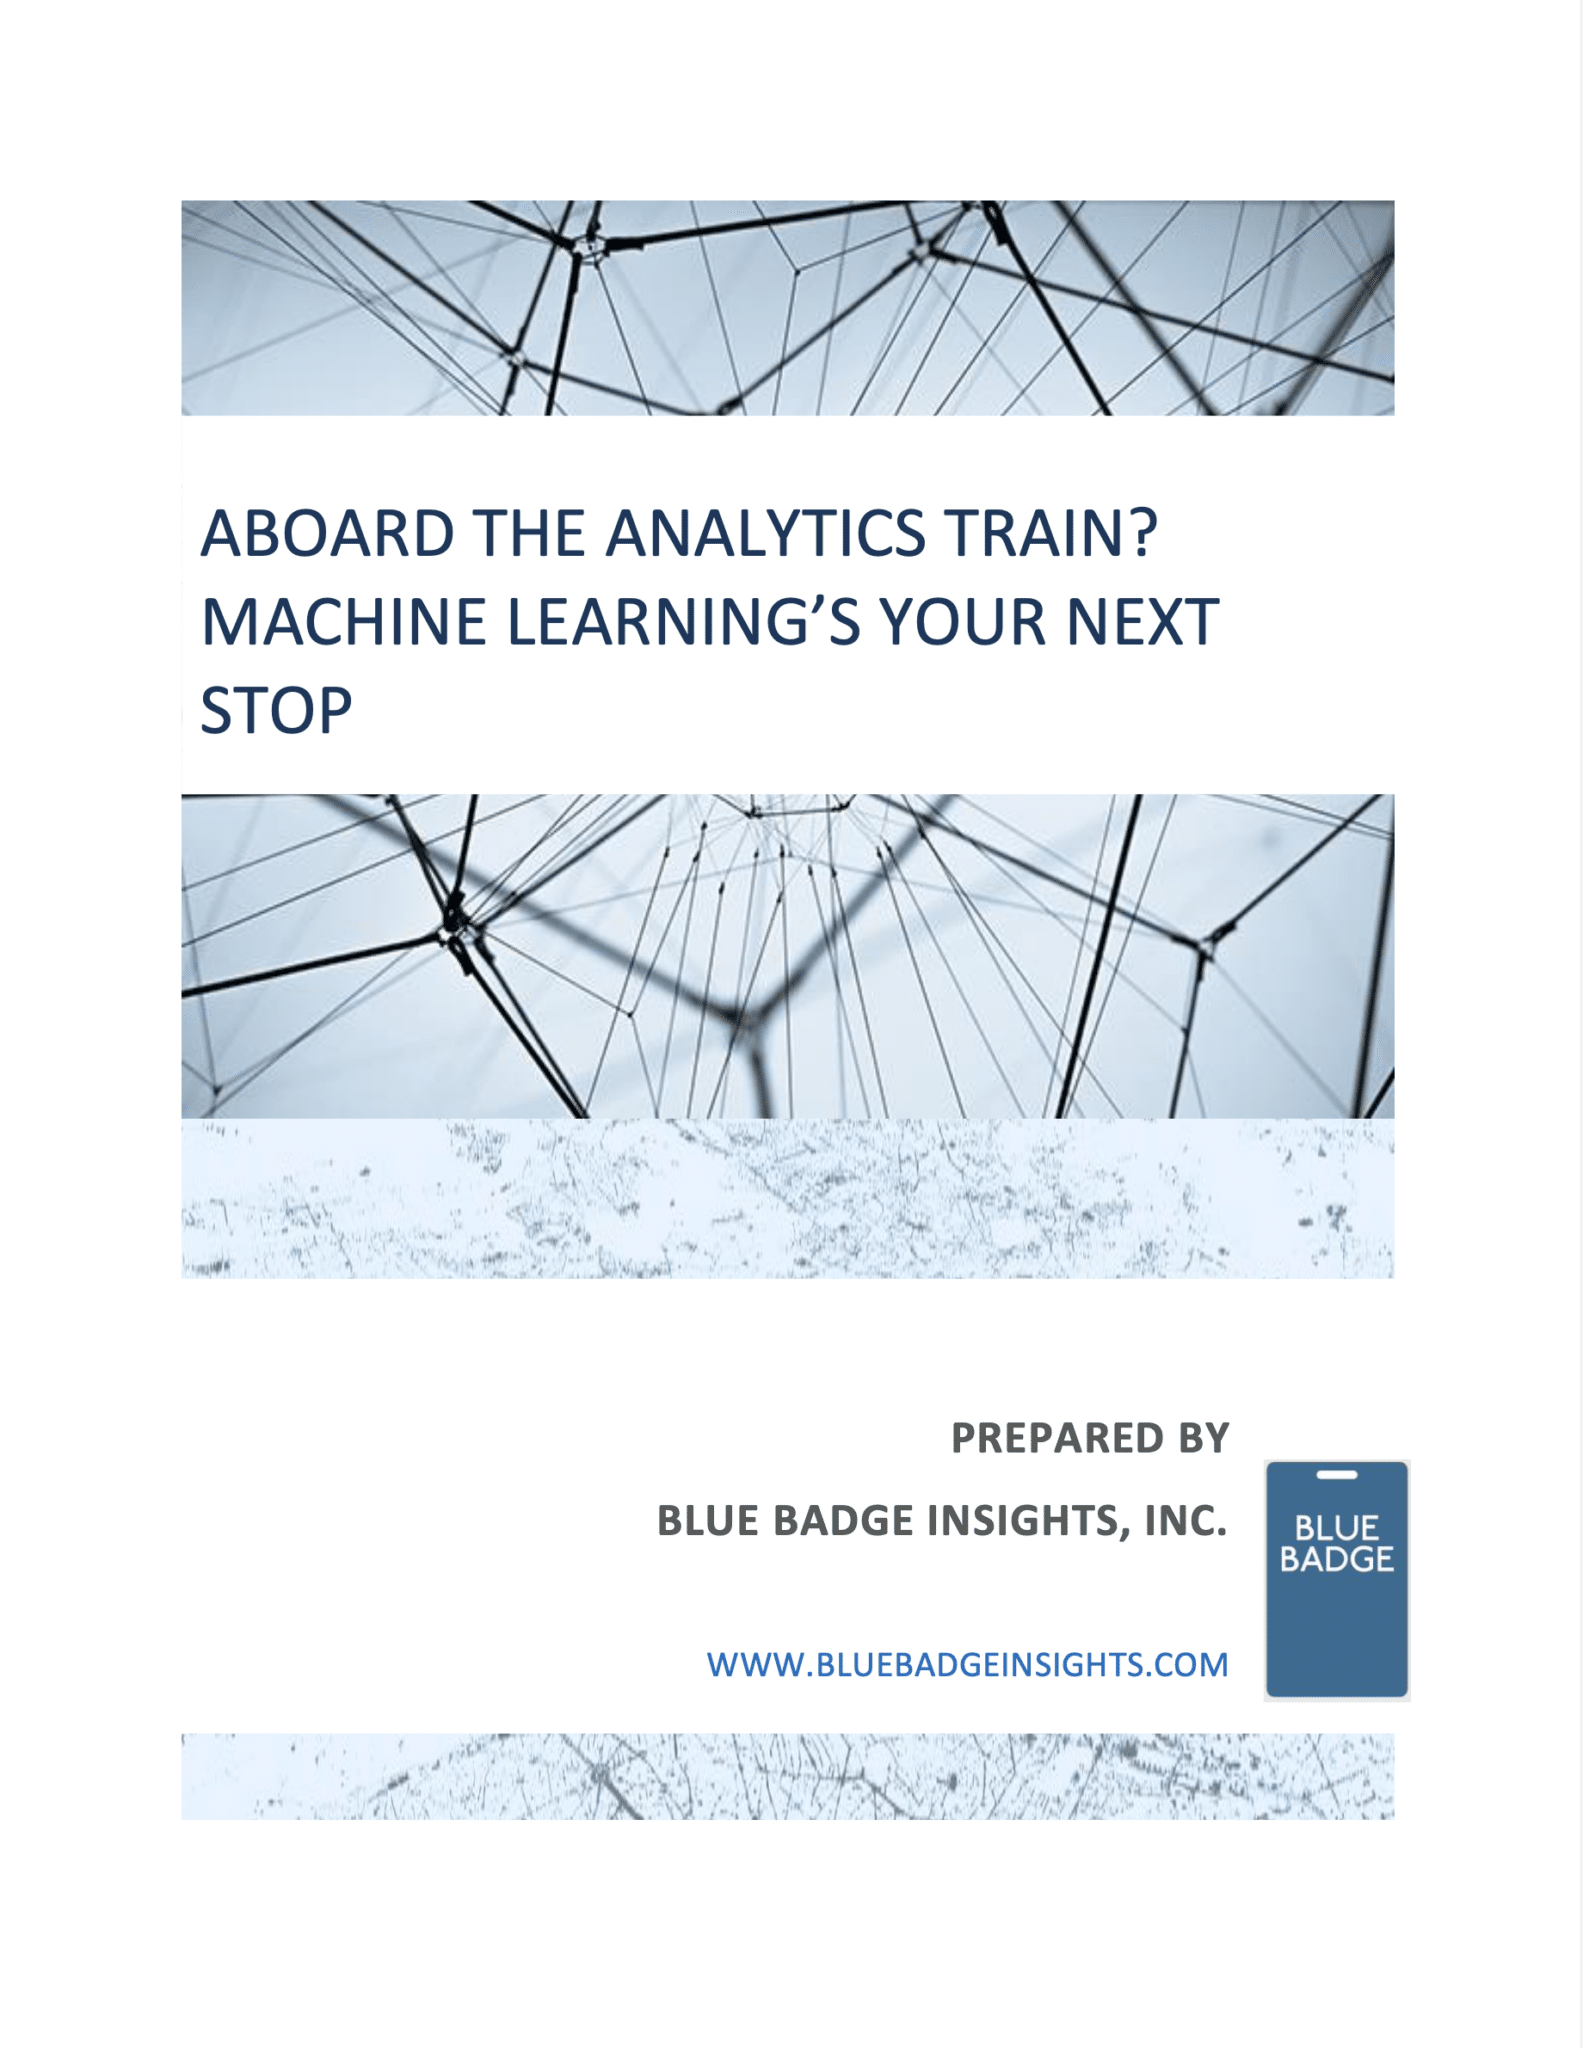 Aboard the analytics train? Machine Learning is Your Next Stop 5